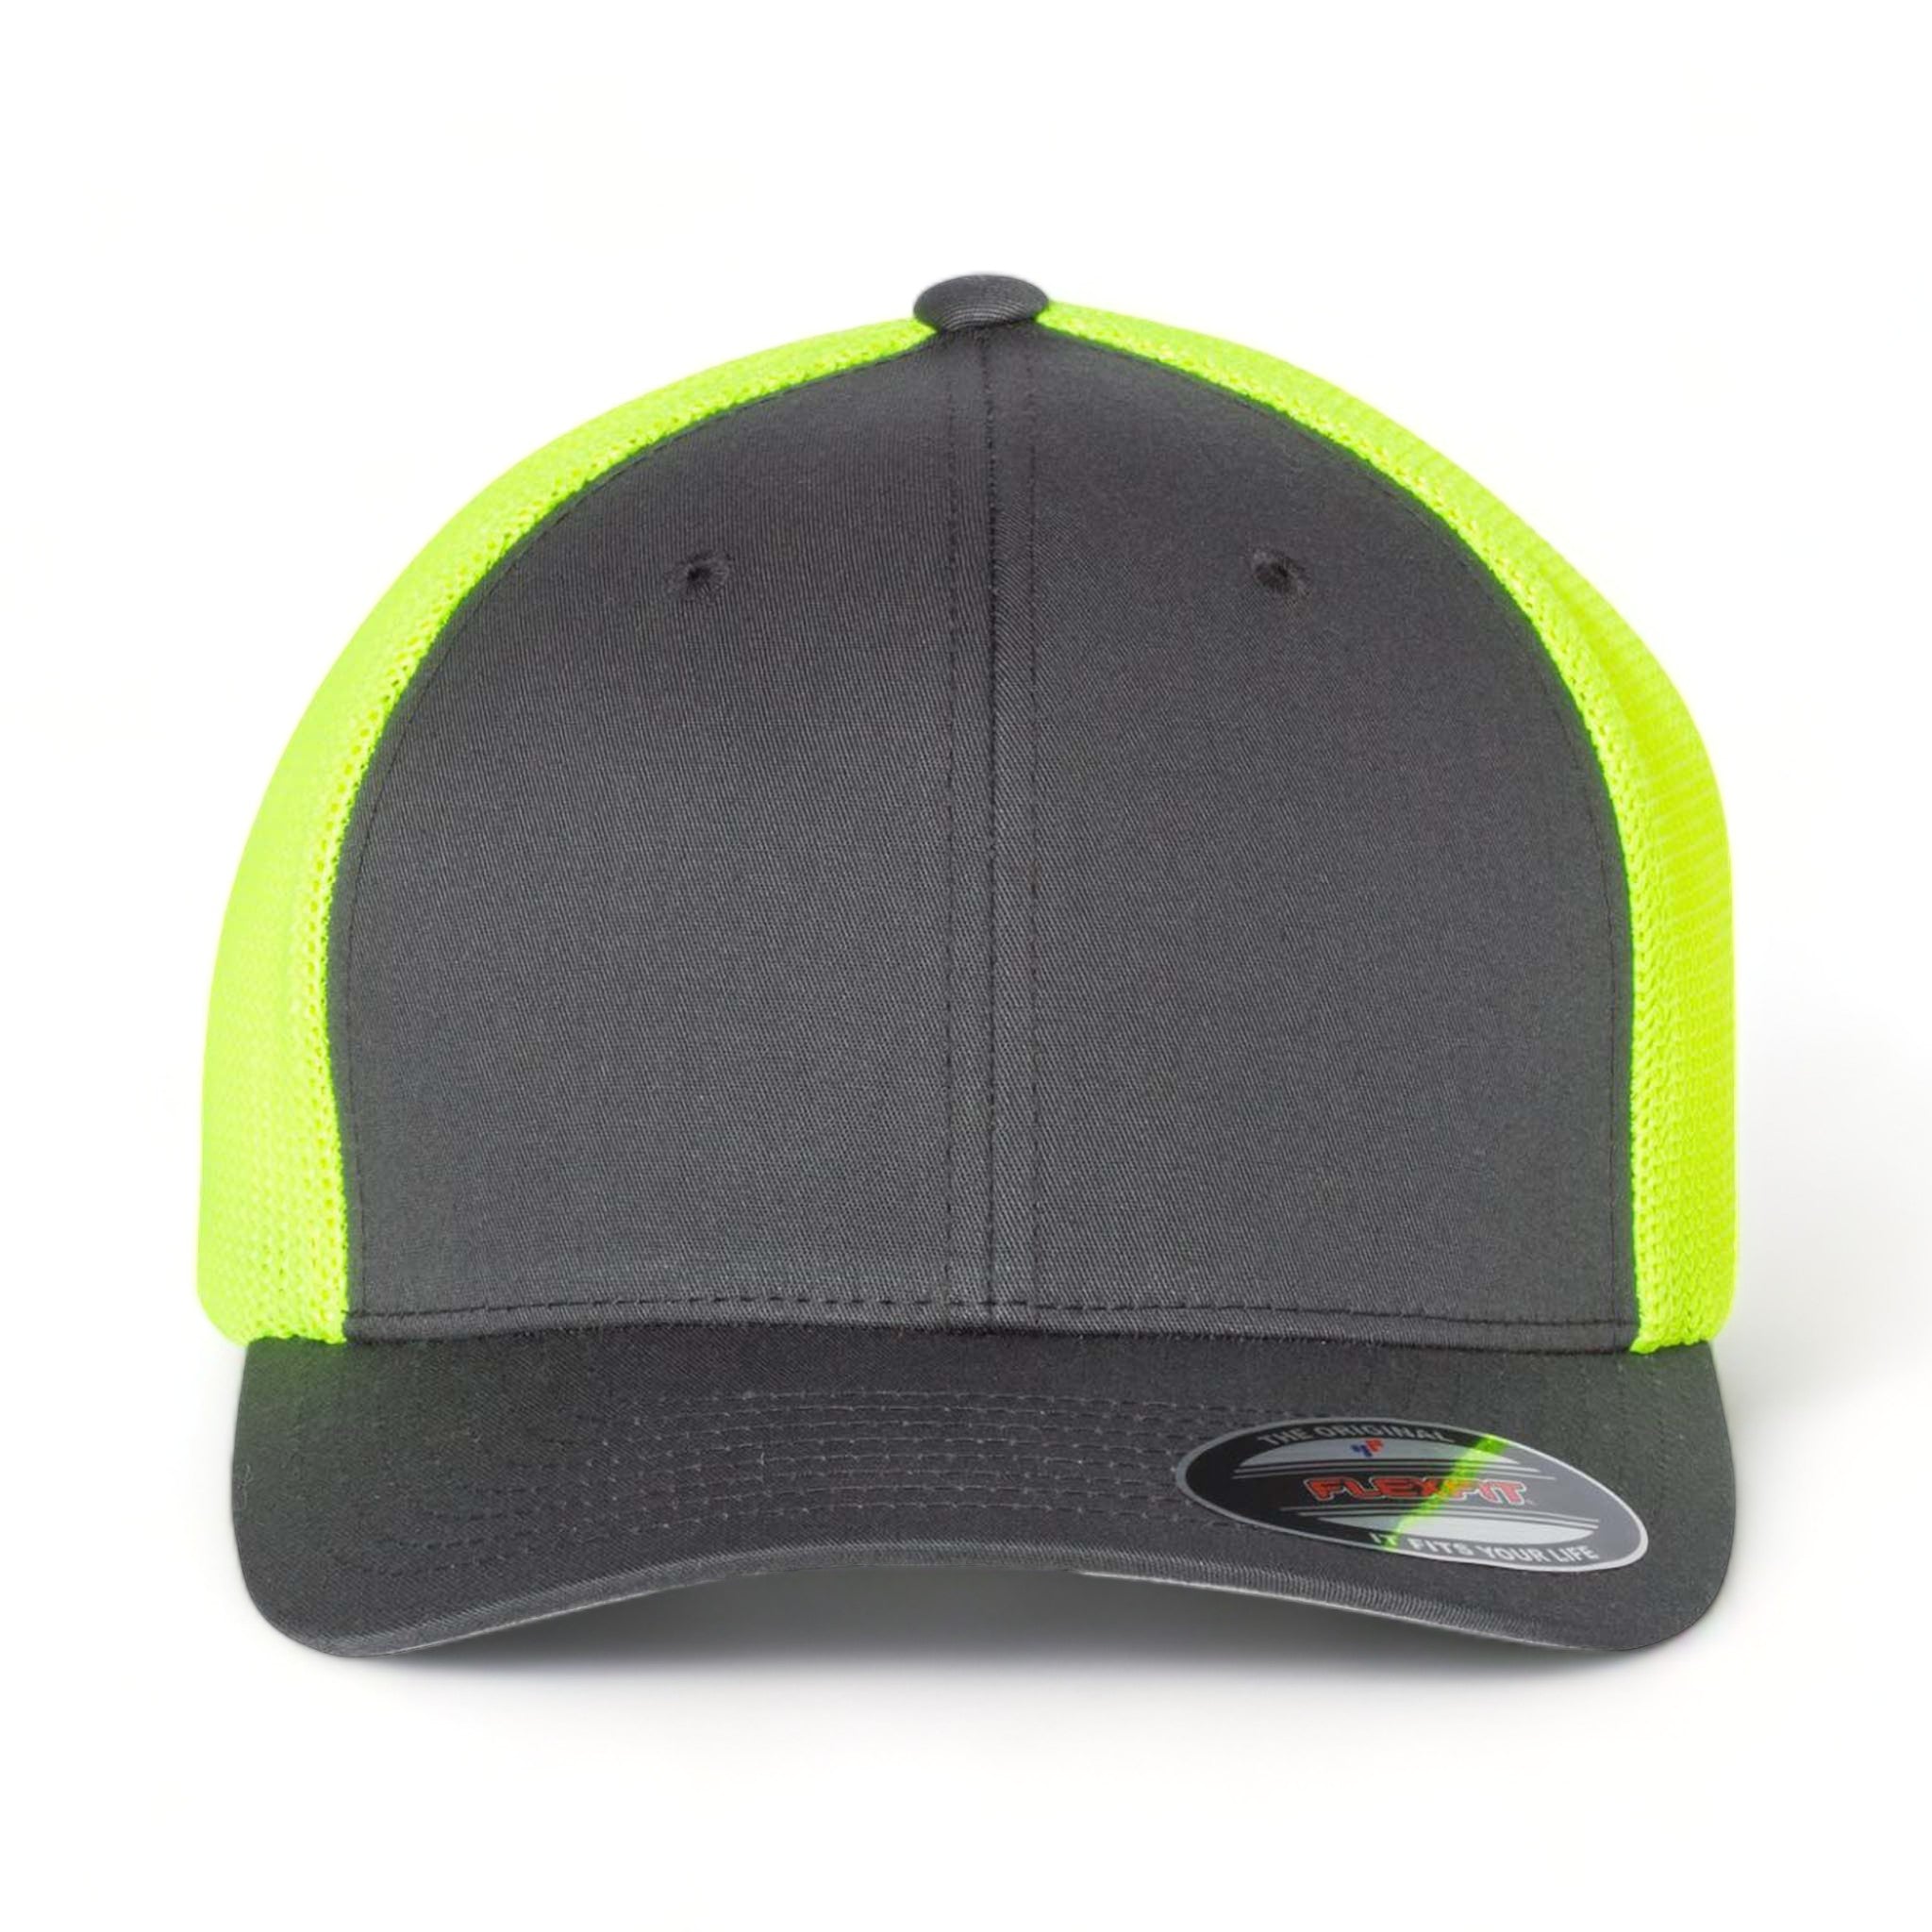 Front view of Flexfit 6511 custom hat in charcoal and neon yellow